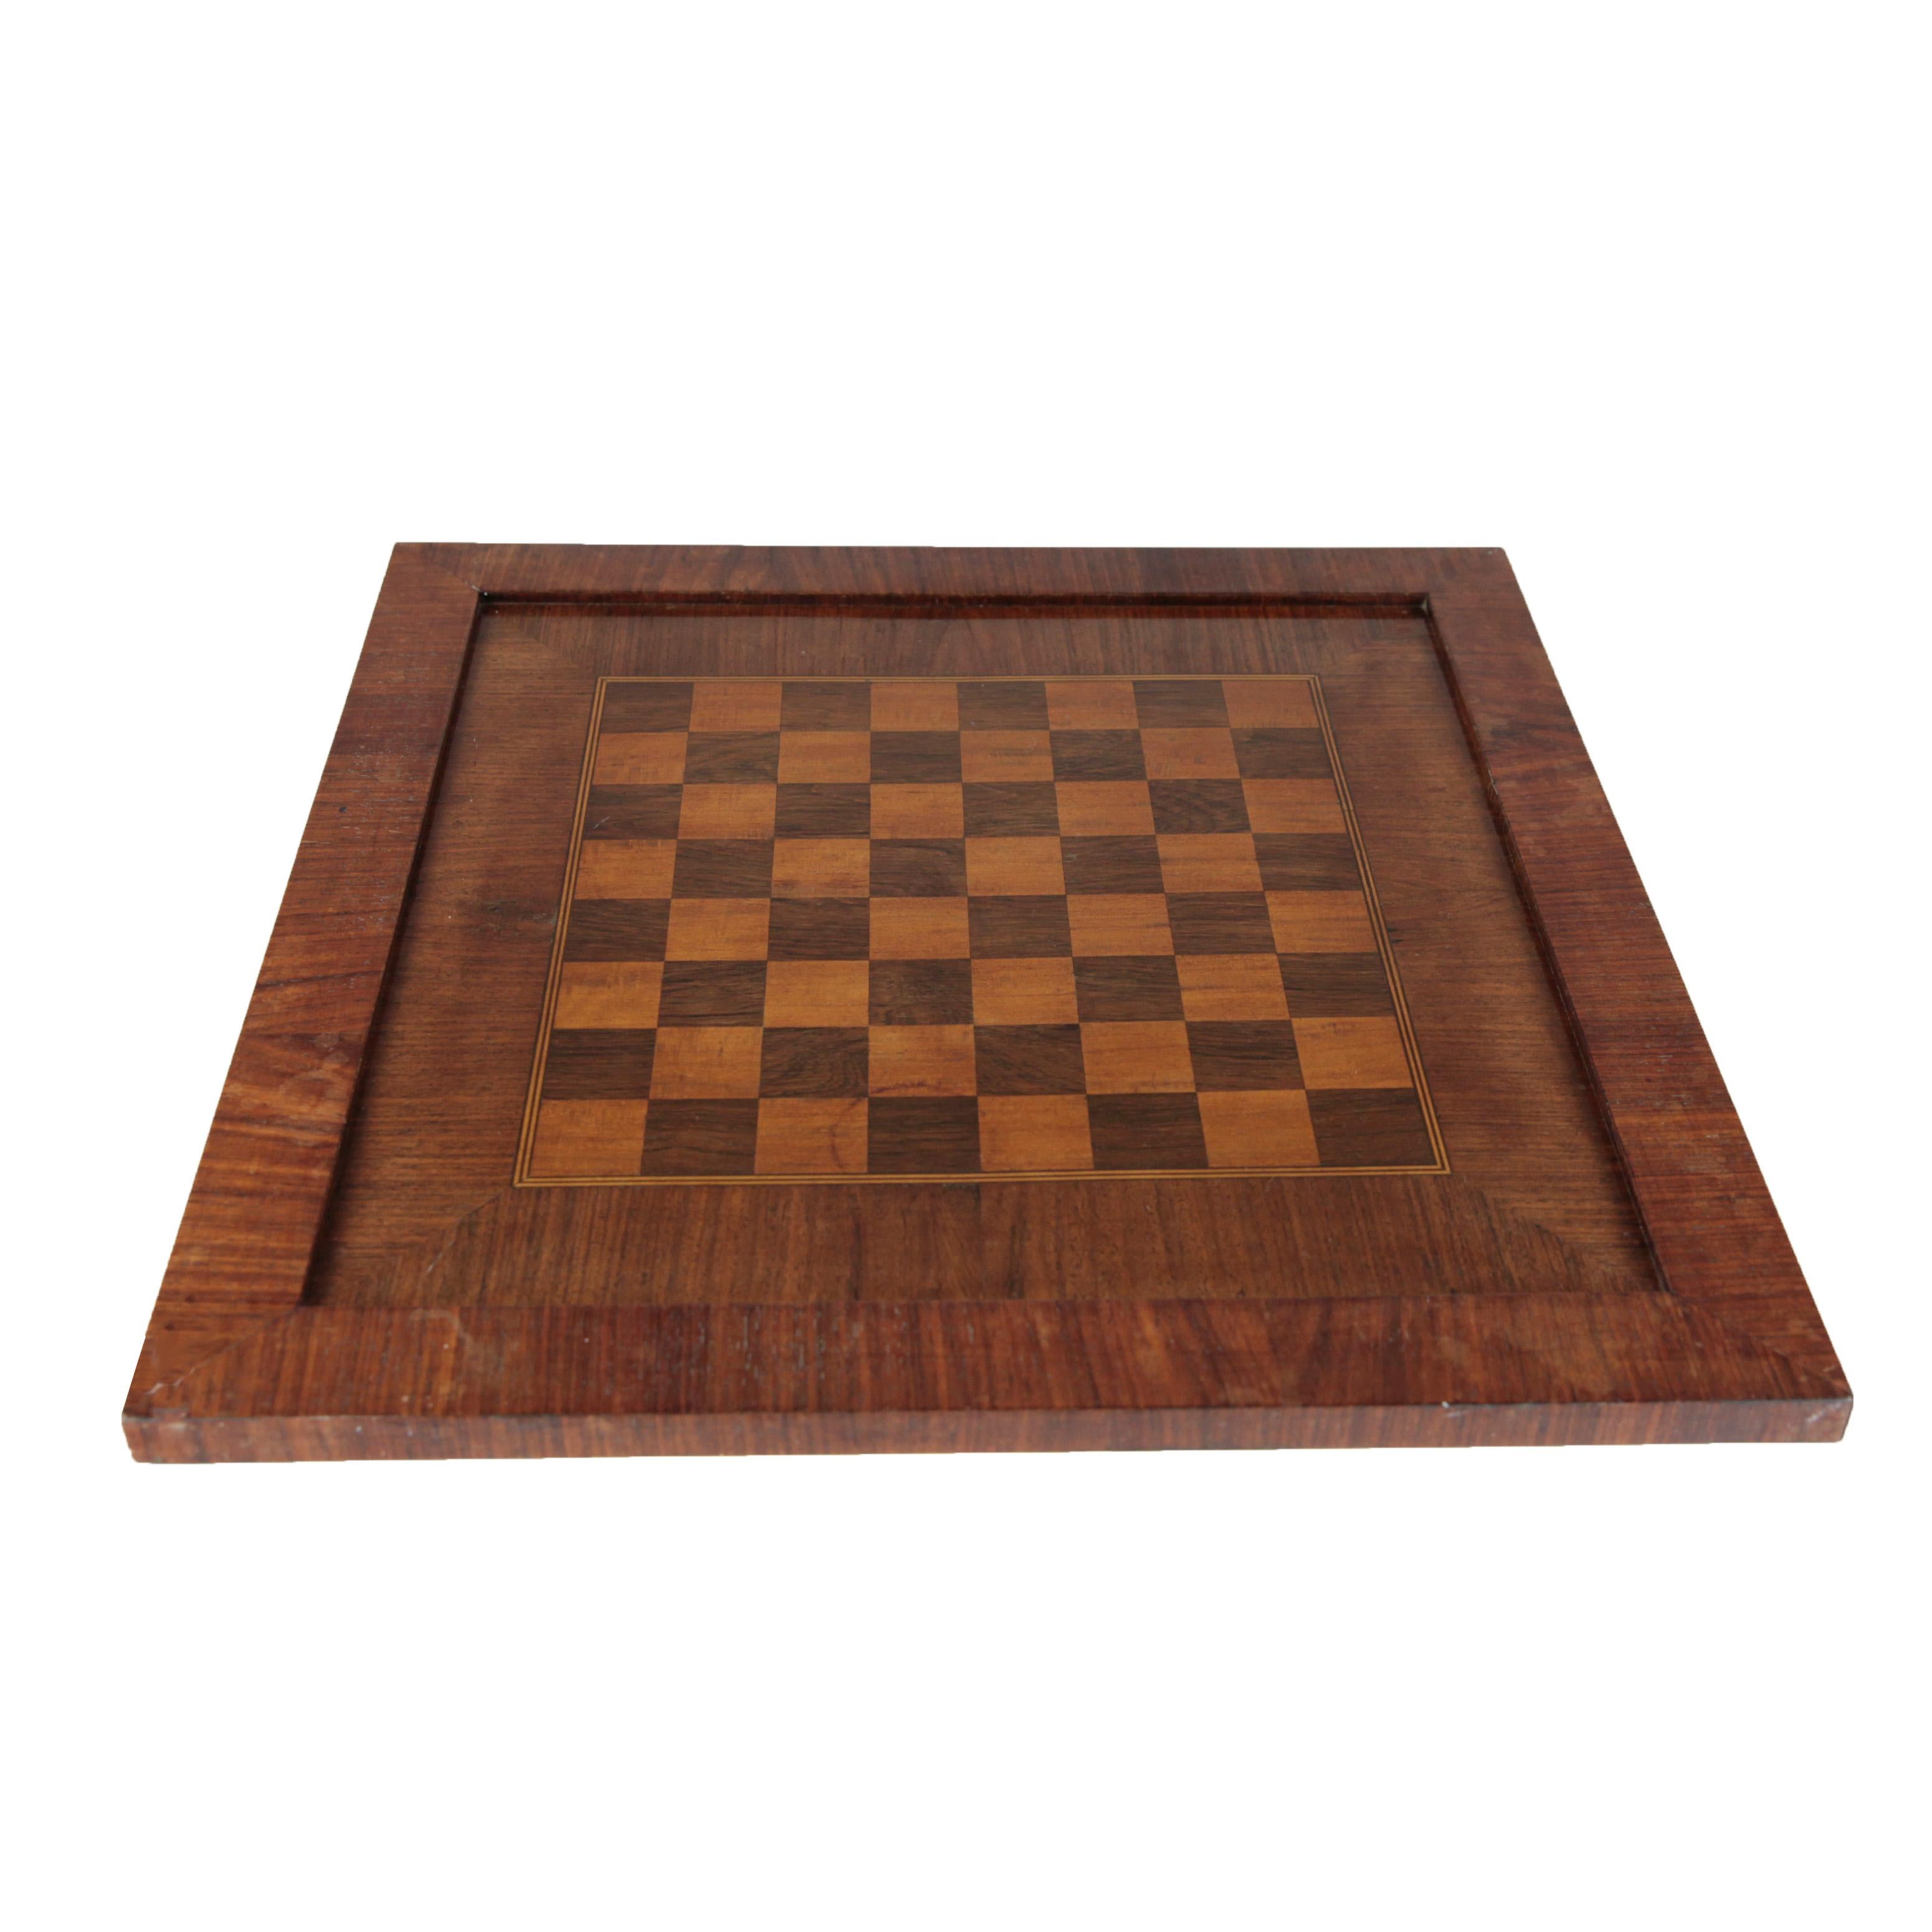 1920s Chess and Play Board, Mahogany and Rosewood Veneer & Marquetry, Red Brown (Furnier) im Angebot